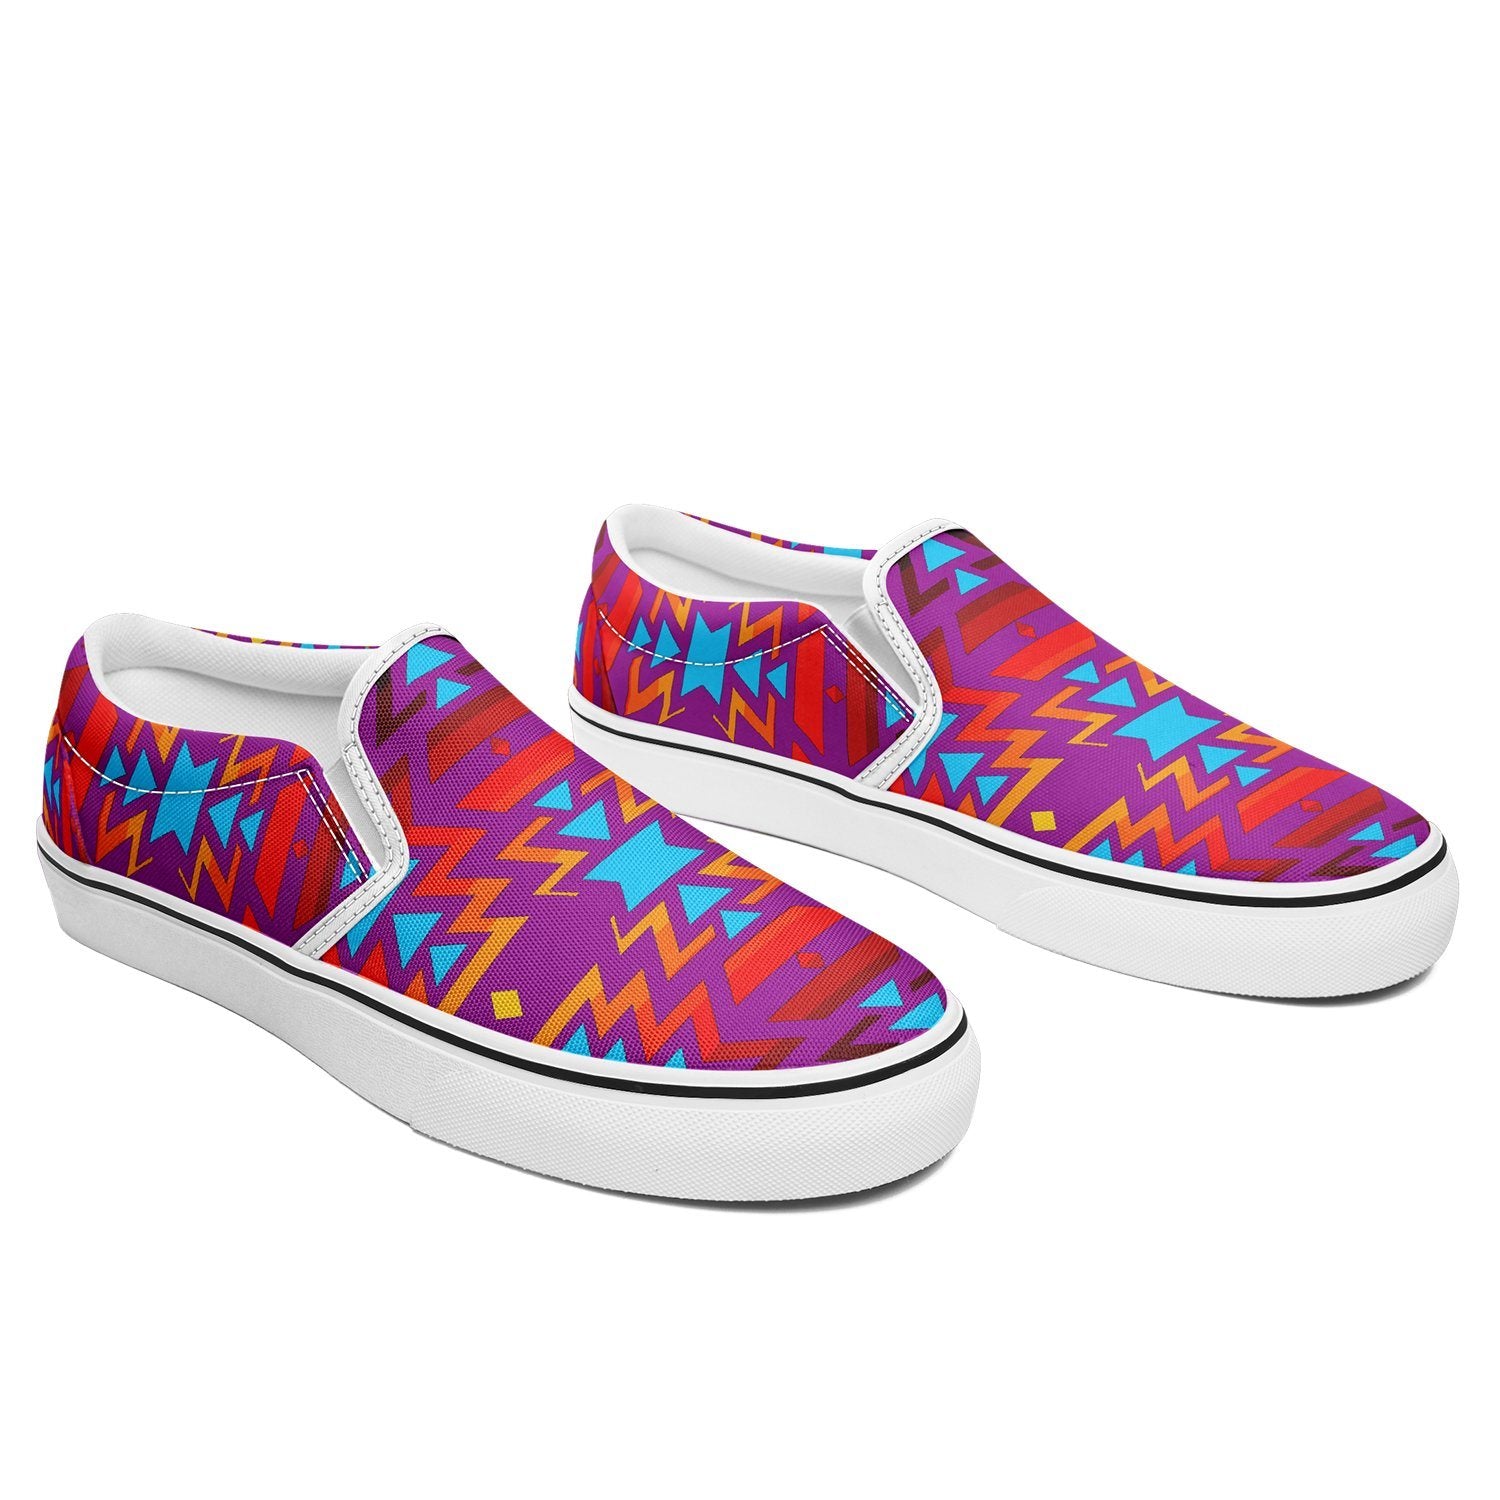 Fire Colors and Turquoise Purple Otoyimm Canvas Slip On Shoes 49 Dzine 